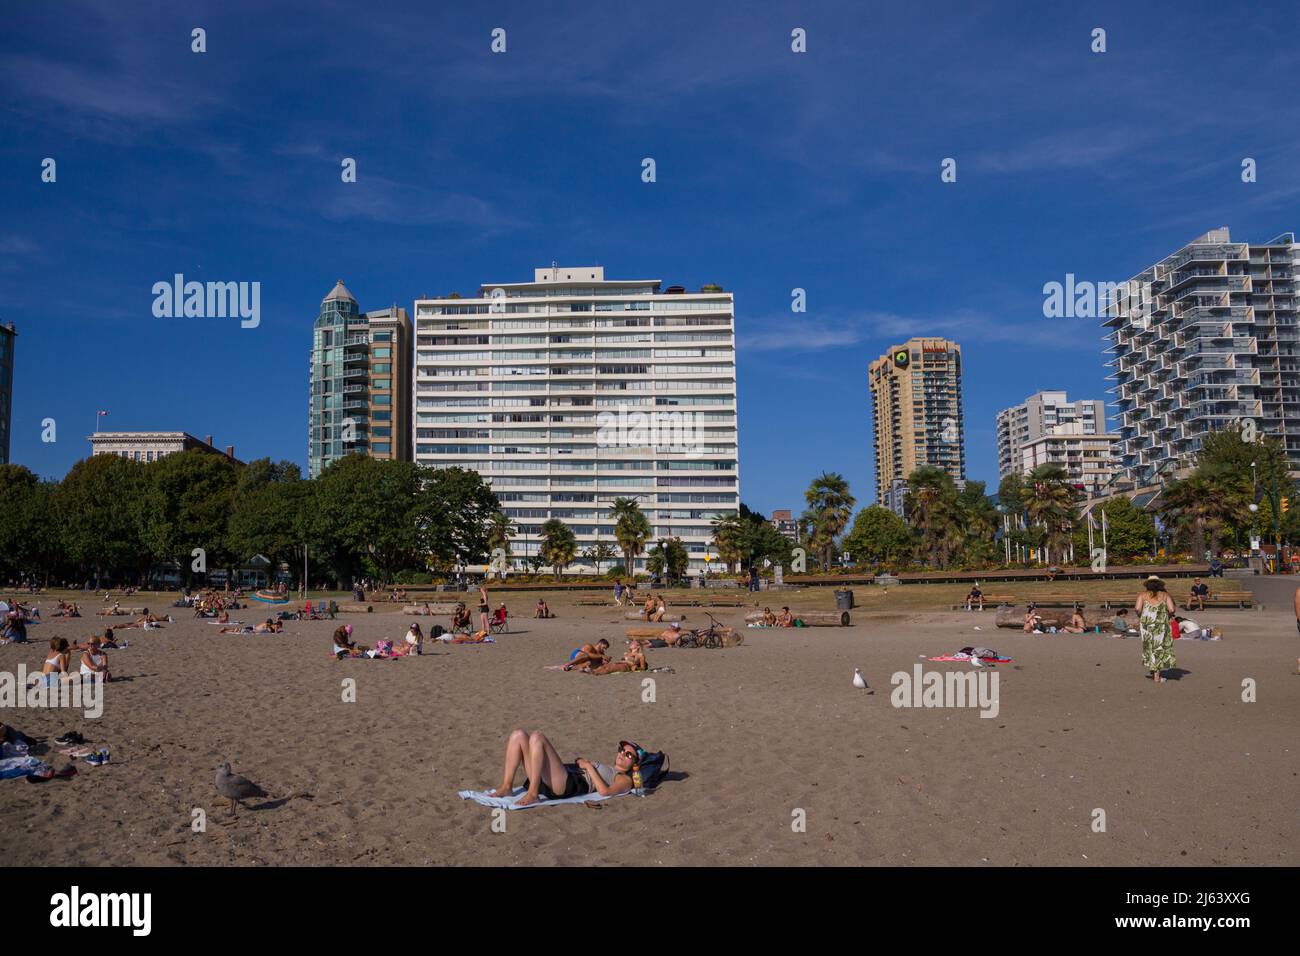 Vancouver downtown. English bay beach. Summer time - people walking, playing and chill out Stock Photo